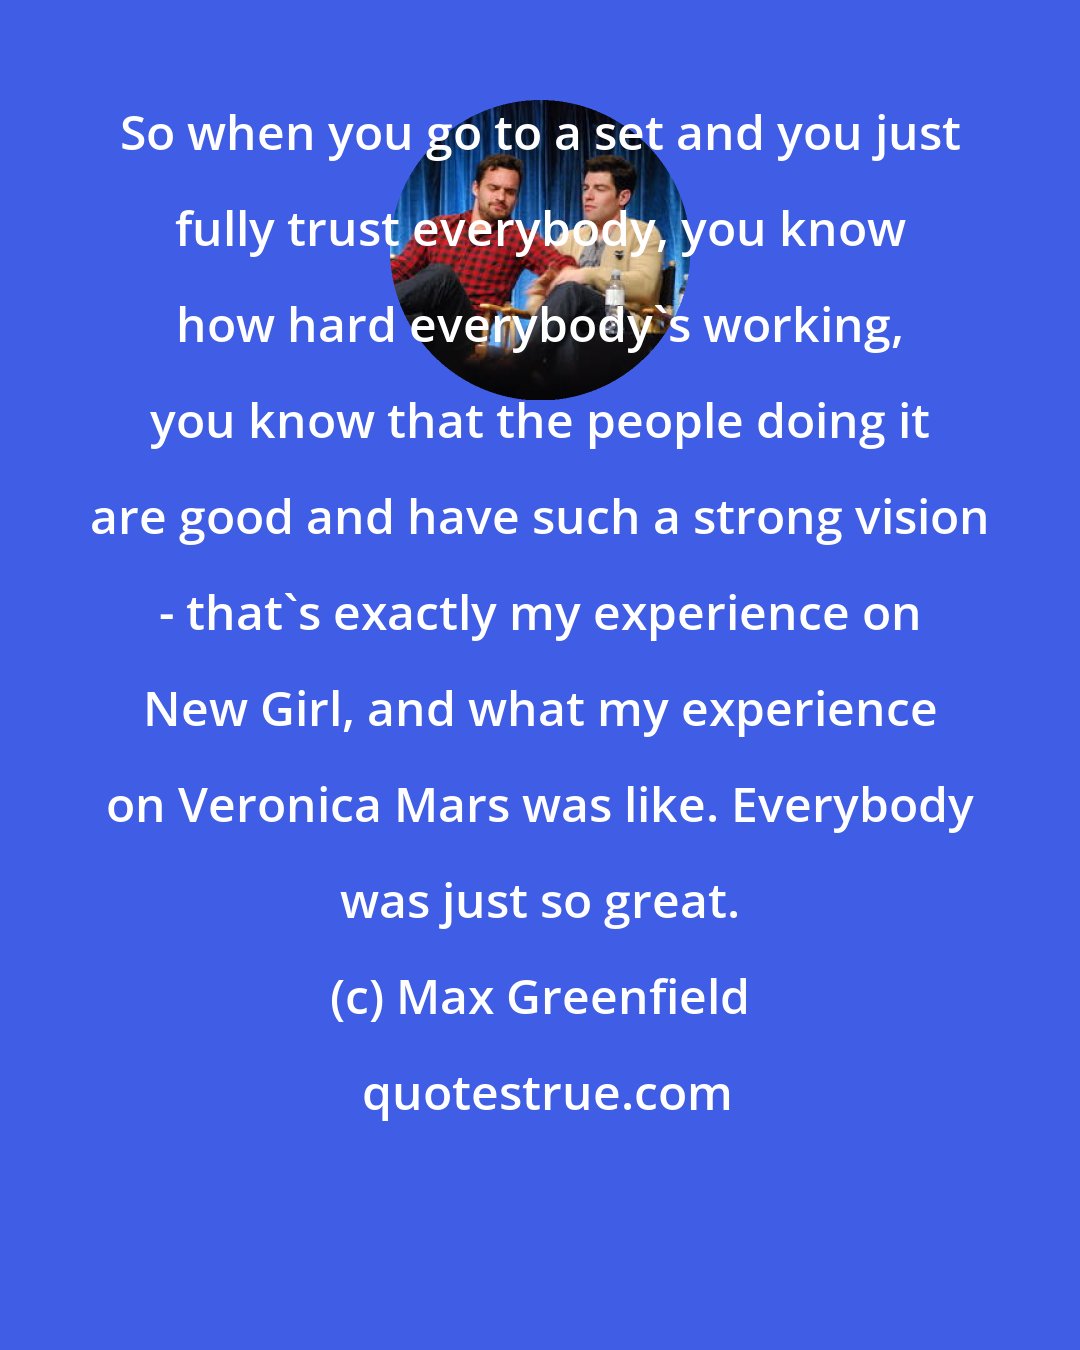 Max Greenfield: So when you go to a set and you just fully trust everybody, you know how hard everybody's working, you know that the people doing it are good and have such a strong vision - that's exactly my experience on New Girl, and what my experience on Veronica Mars was like. Everybody was just so great.